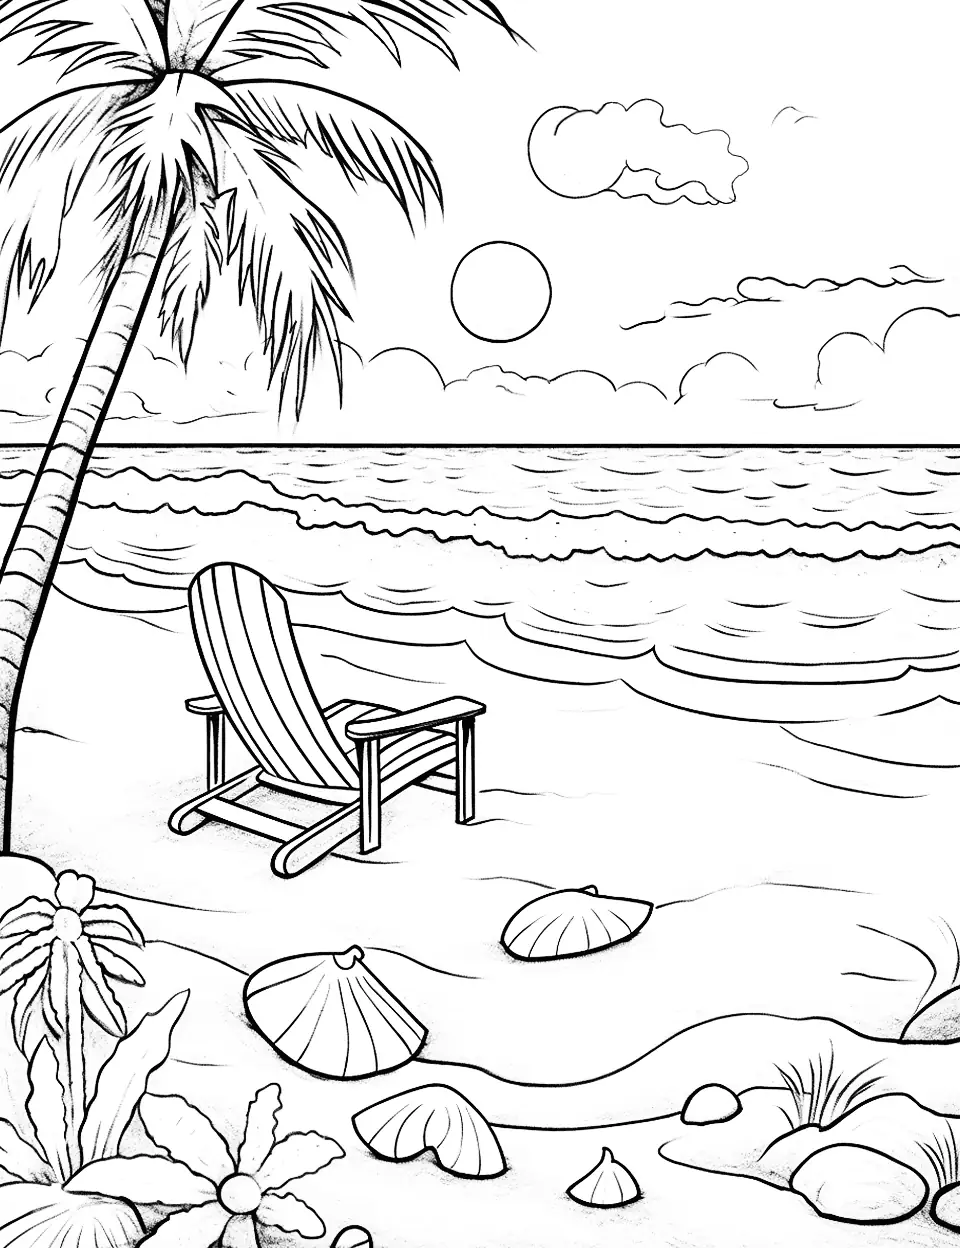 Tropical Beach Paradise Summer Coloring Page - A detailed picture of a tropical beach with palm trees, seashells, and starfish.